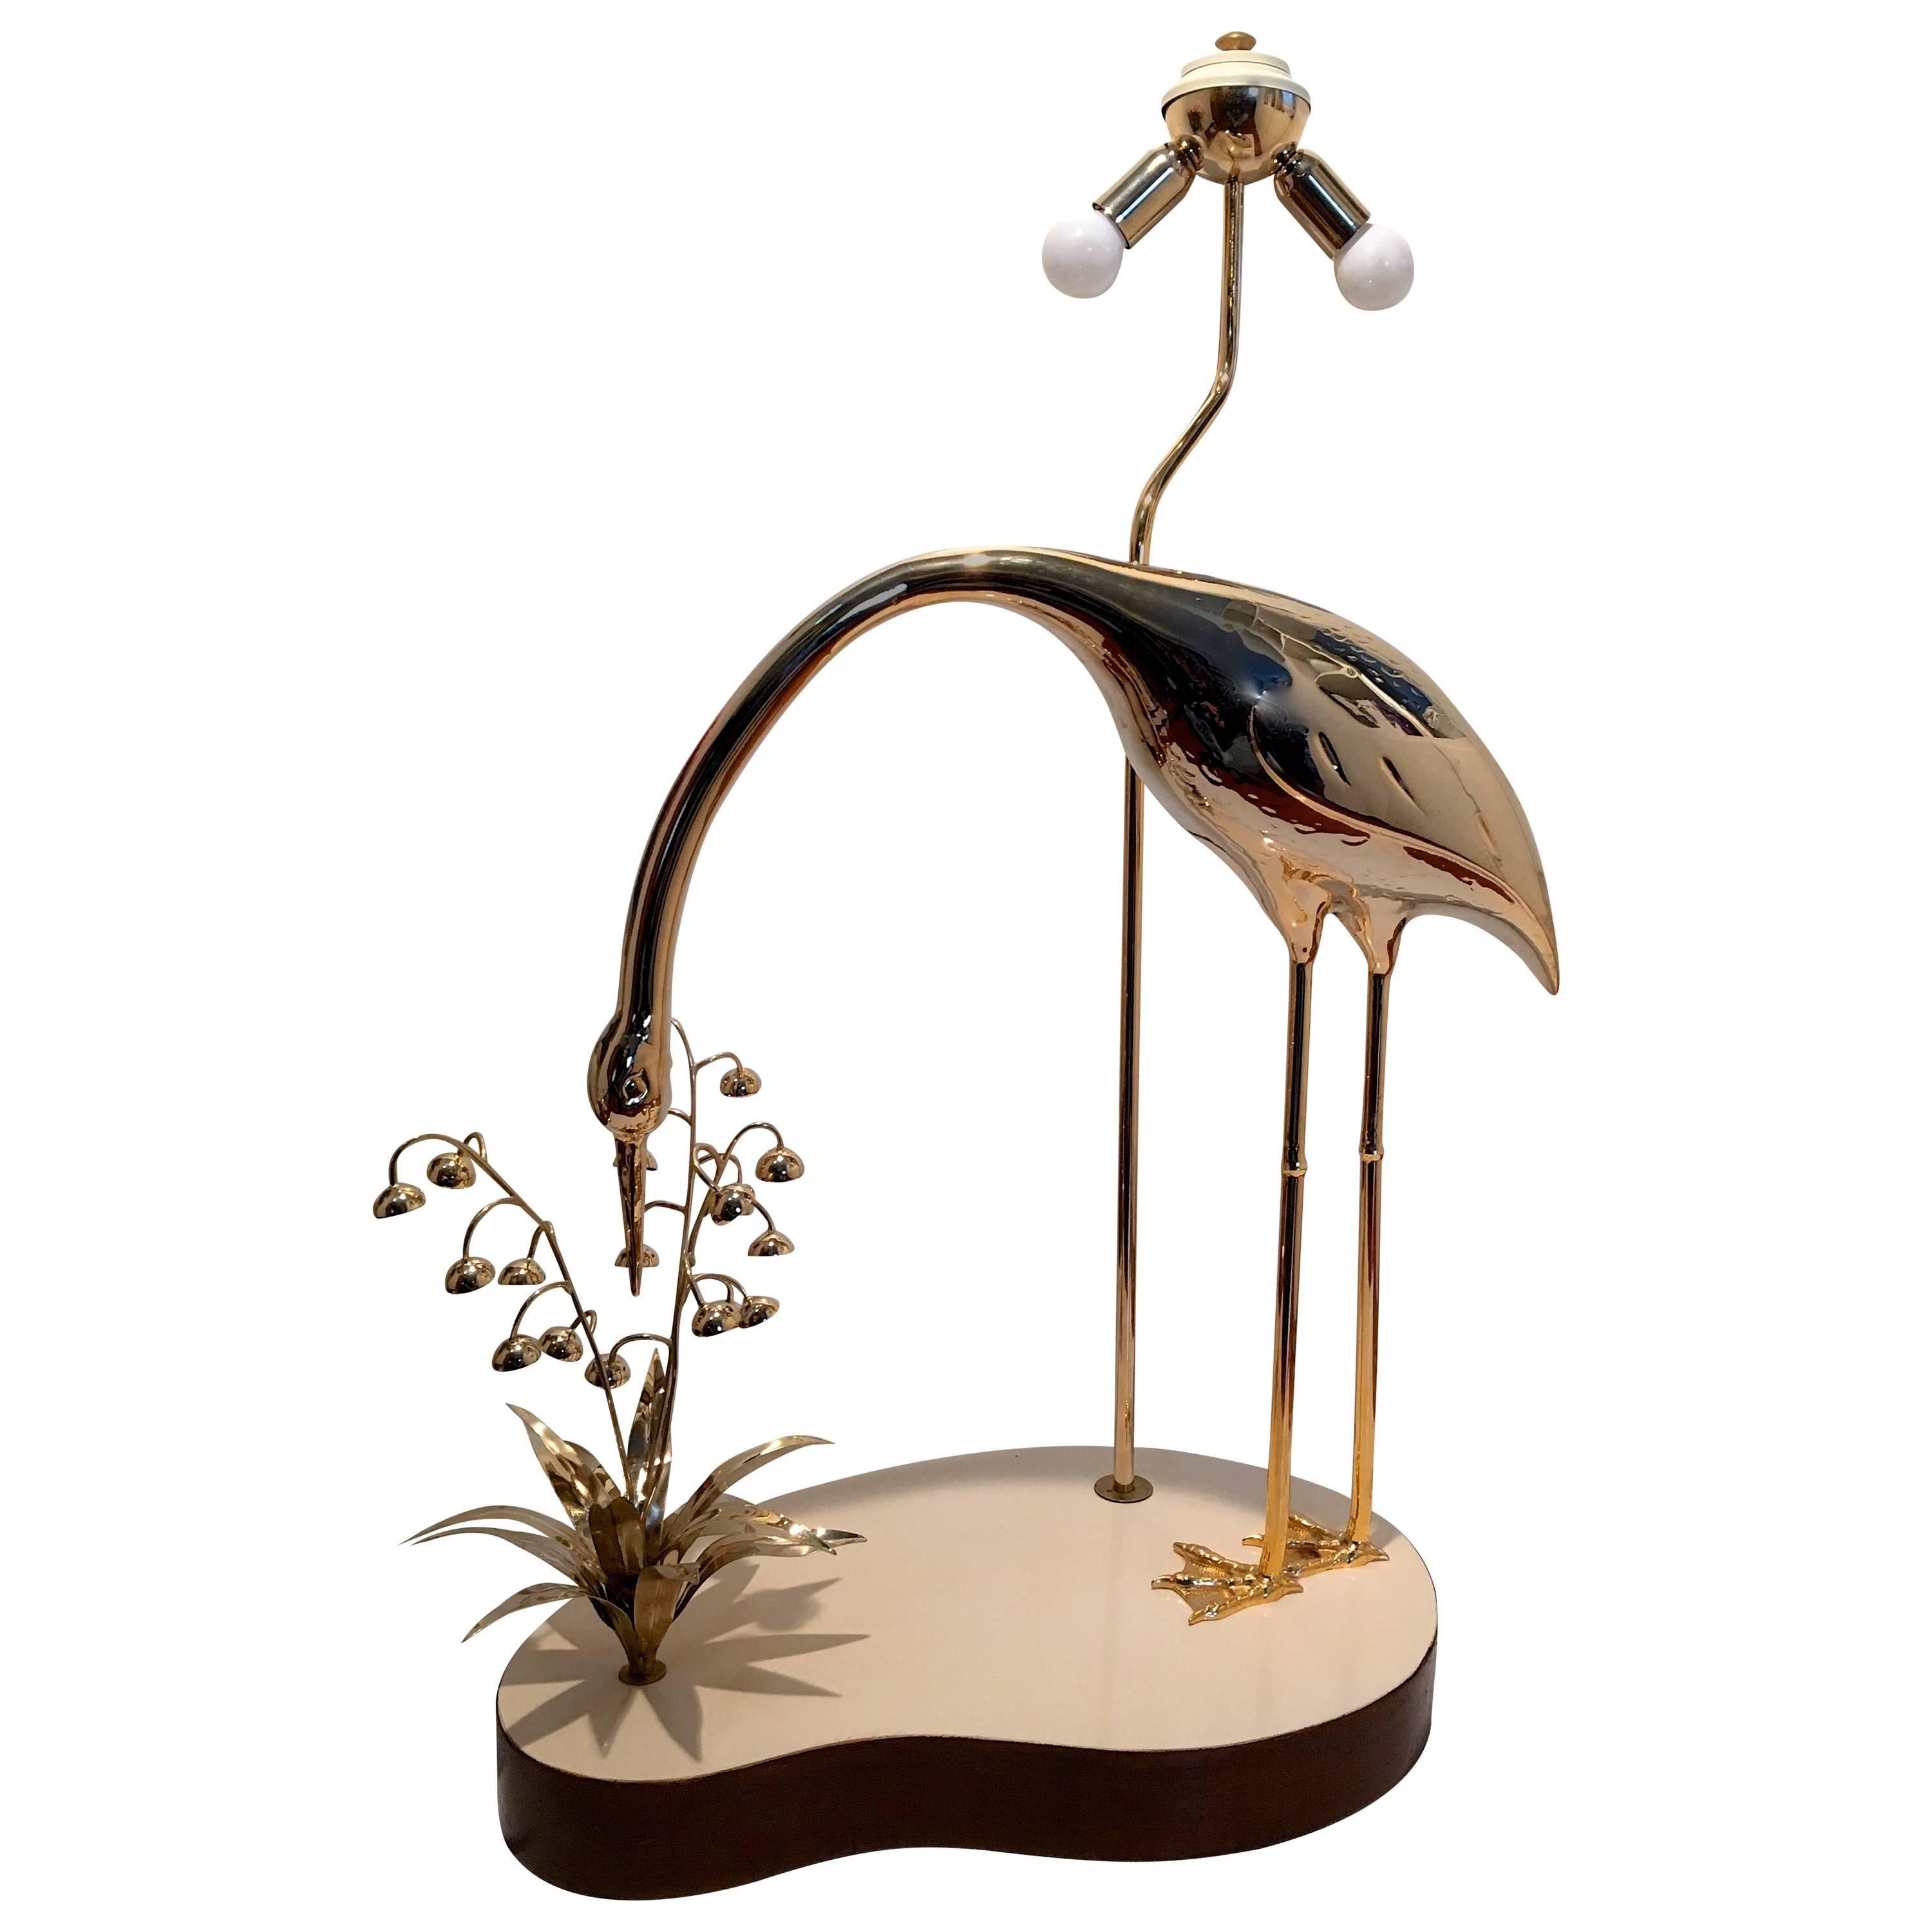 Floor Lamp with a Brass Sculpture of a Heron and Flowers